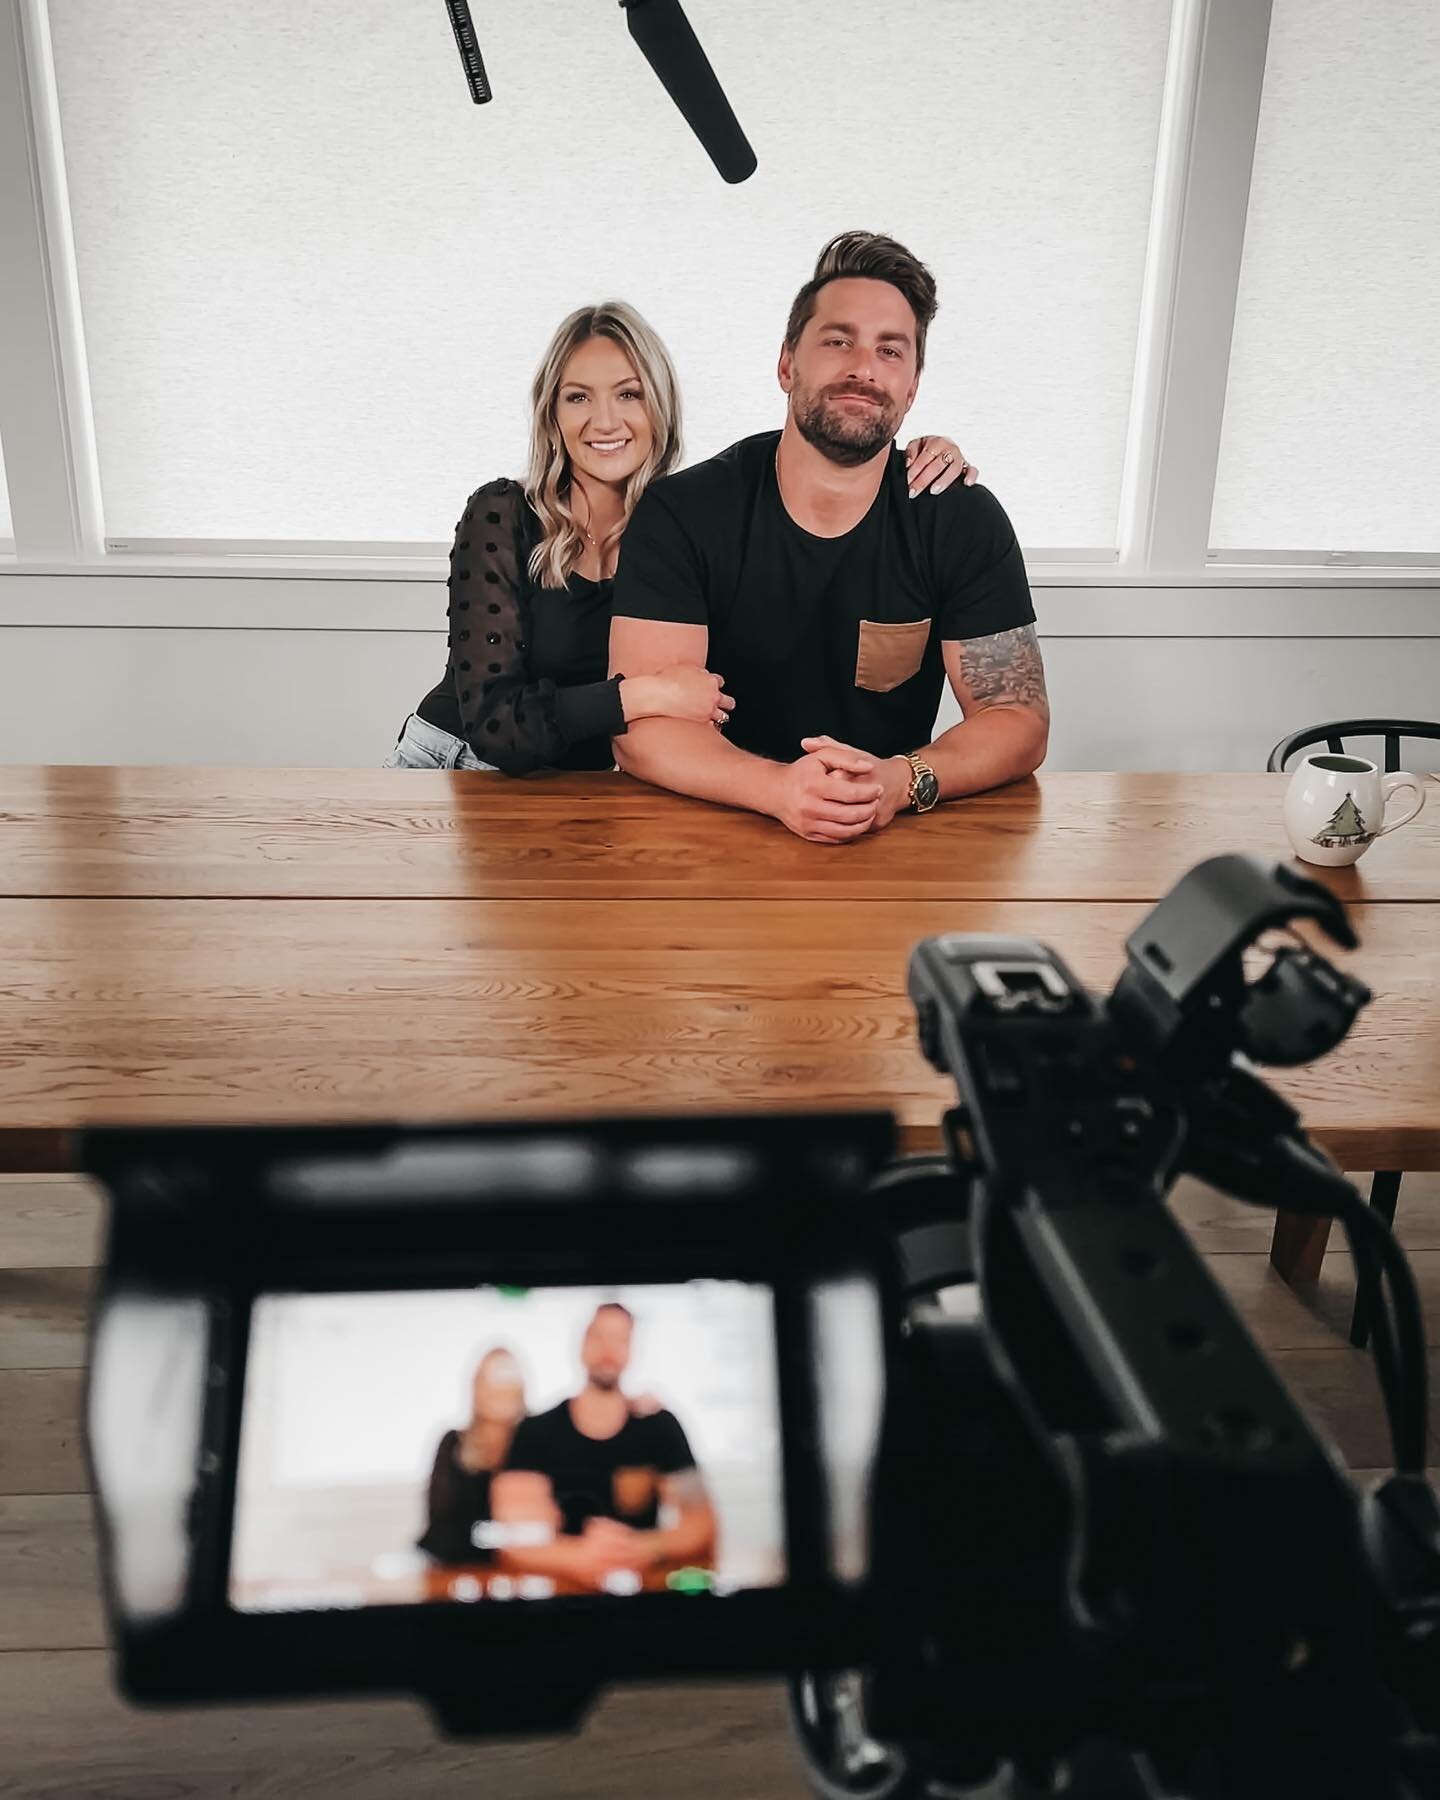 When we aren&rsquo;t selling houses we are making super sweet videos with @ronvanlife. We&rsquo;ve had lots of questions about these so no, these videos were not for HGTV but for our own marketing! But HGTV is still a hard maybe. It&rsquo;s at least 